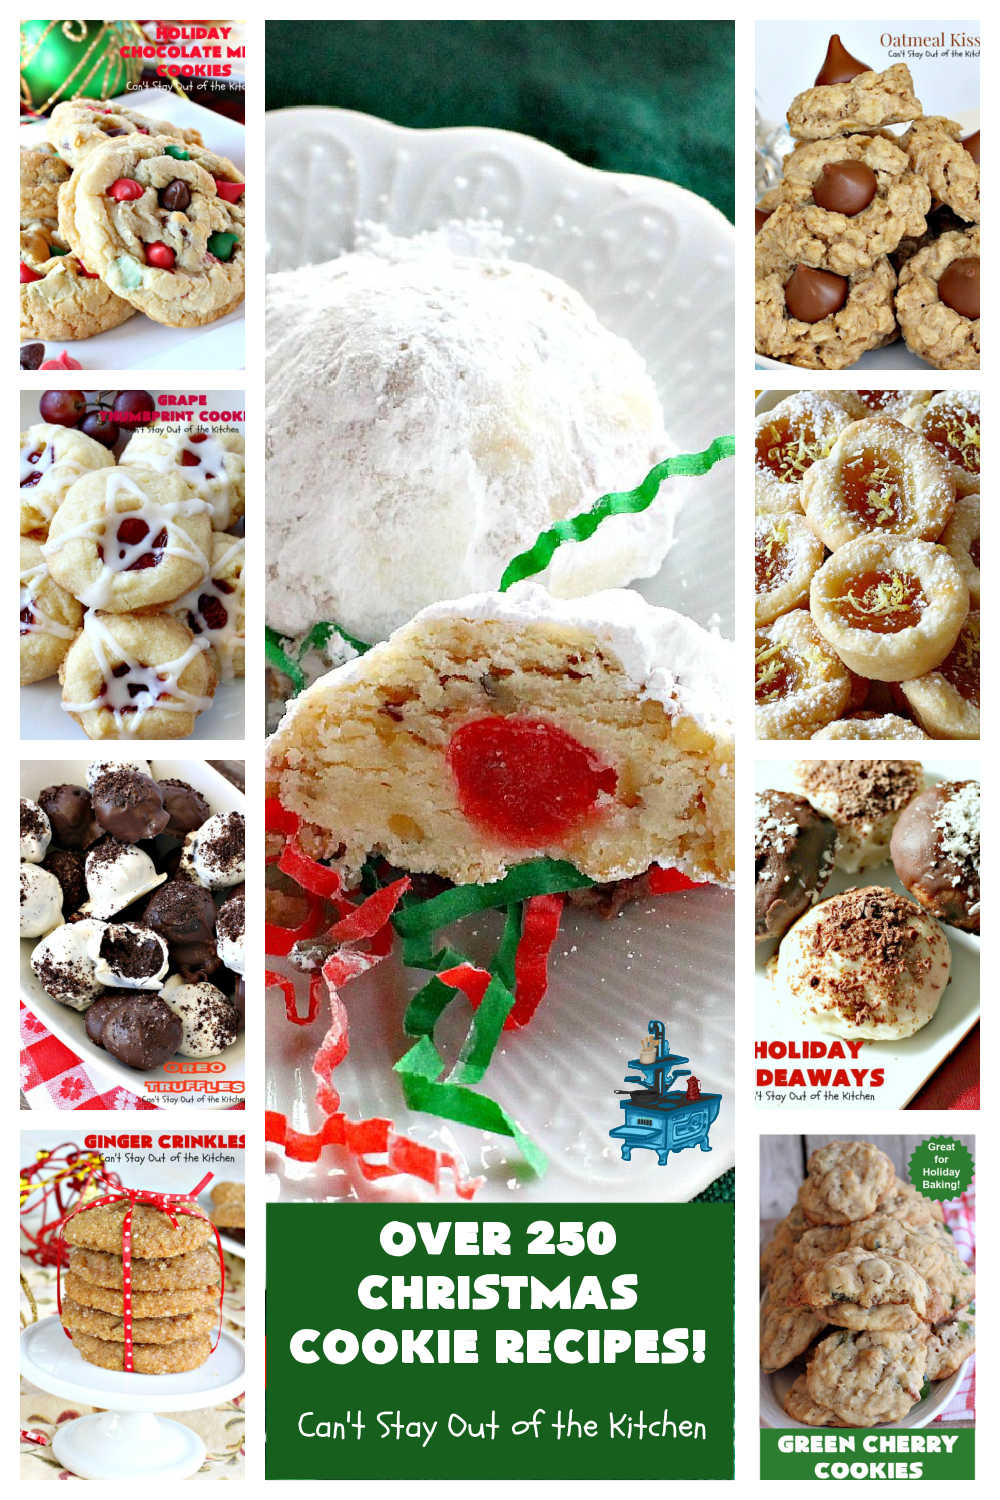 Christmas Cookies | Can't Stay Out of the Kitchen | Over 250 favorite #ChristmasCookies including #lemon #chocolate #cherry #thumbprint #RedVelvet #funfetti #pumpkin #PeanutButter #apricot #raspberry #fruitcake. So many delightful #cookies to bake for a #ChristmasCookieExchange or #HolidayBaking. #dessert